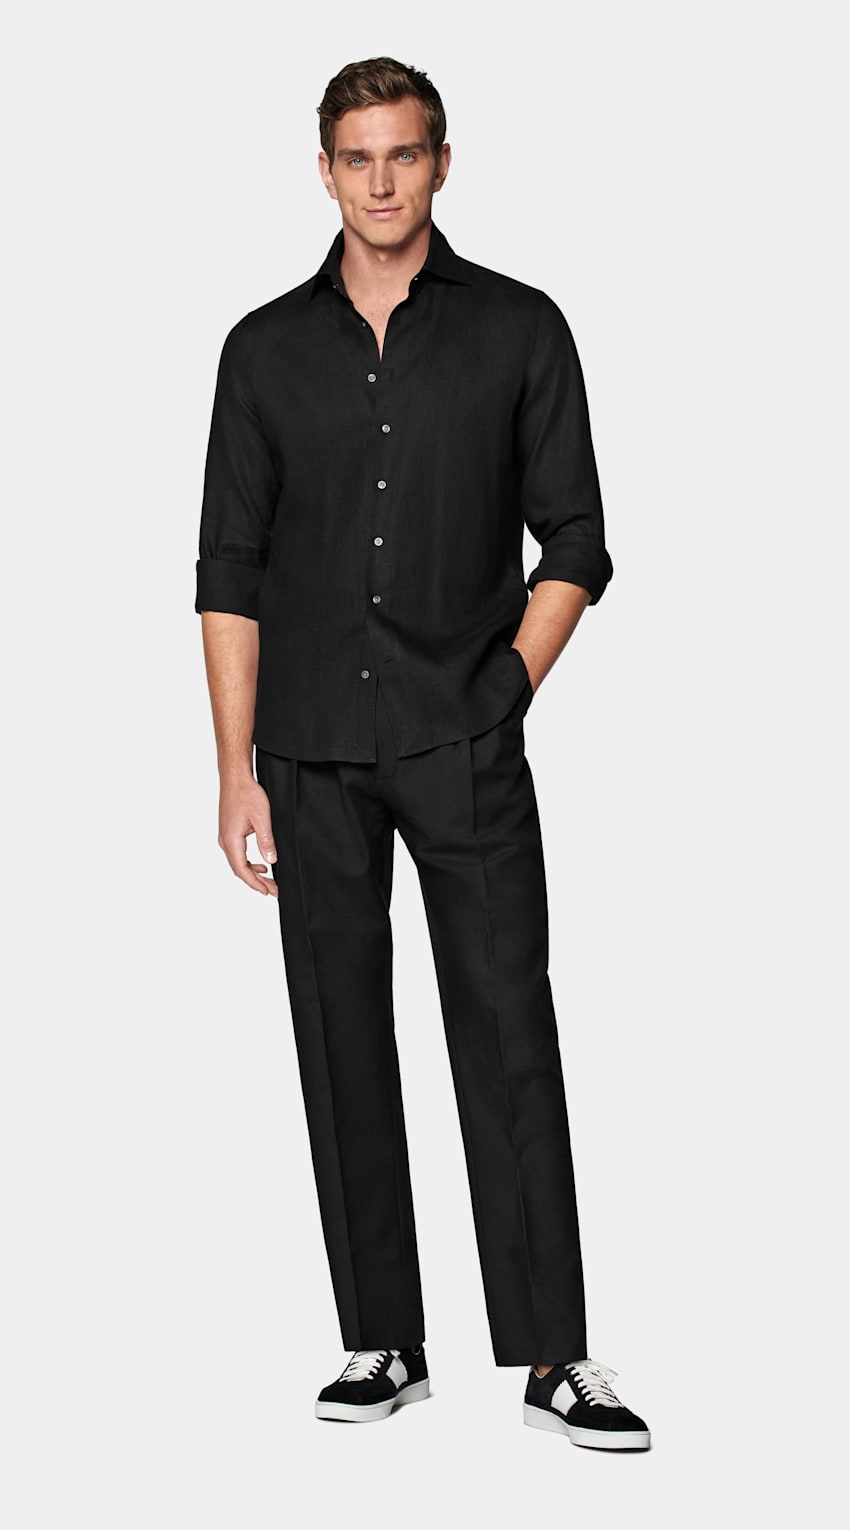 SUITSUPPLY Pure Linen by Albini, Italy Black Slim Fit Shirt